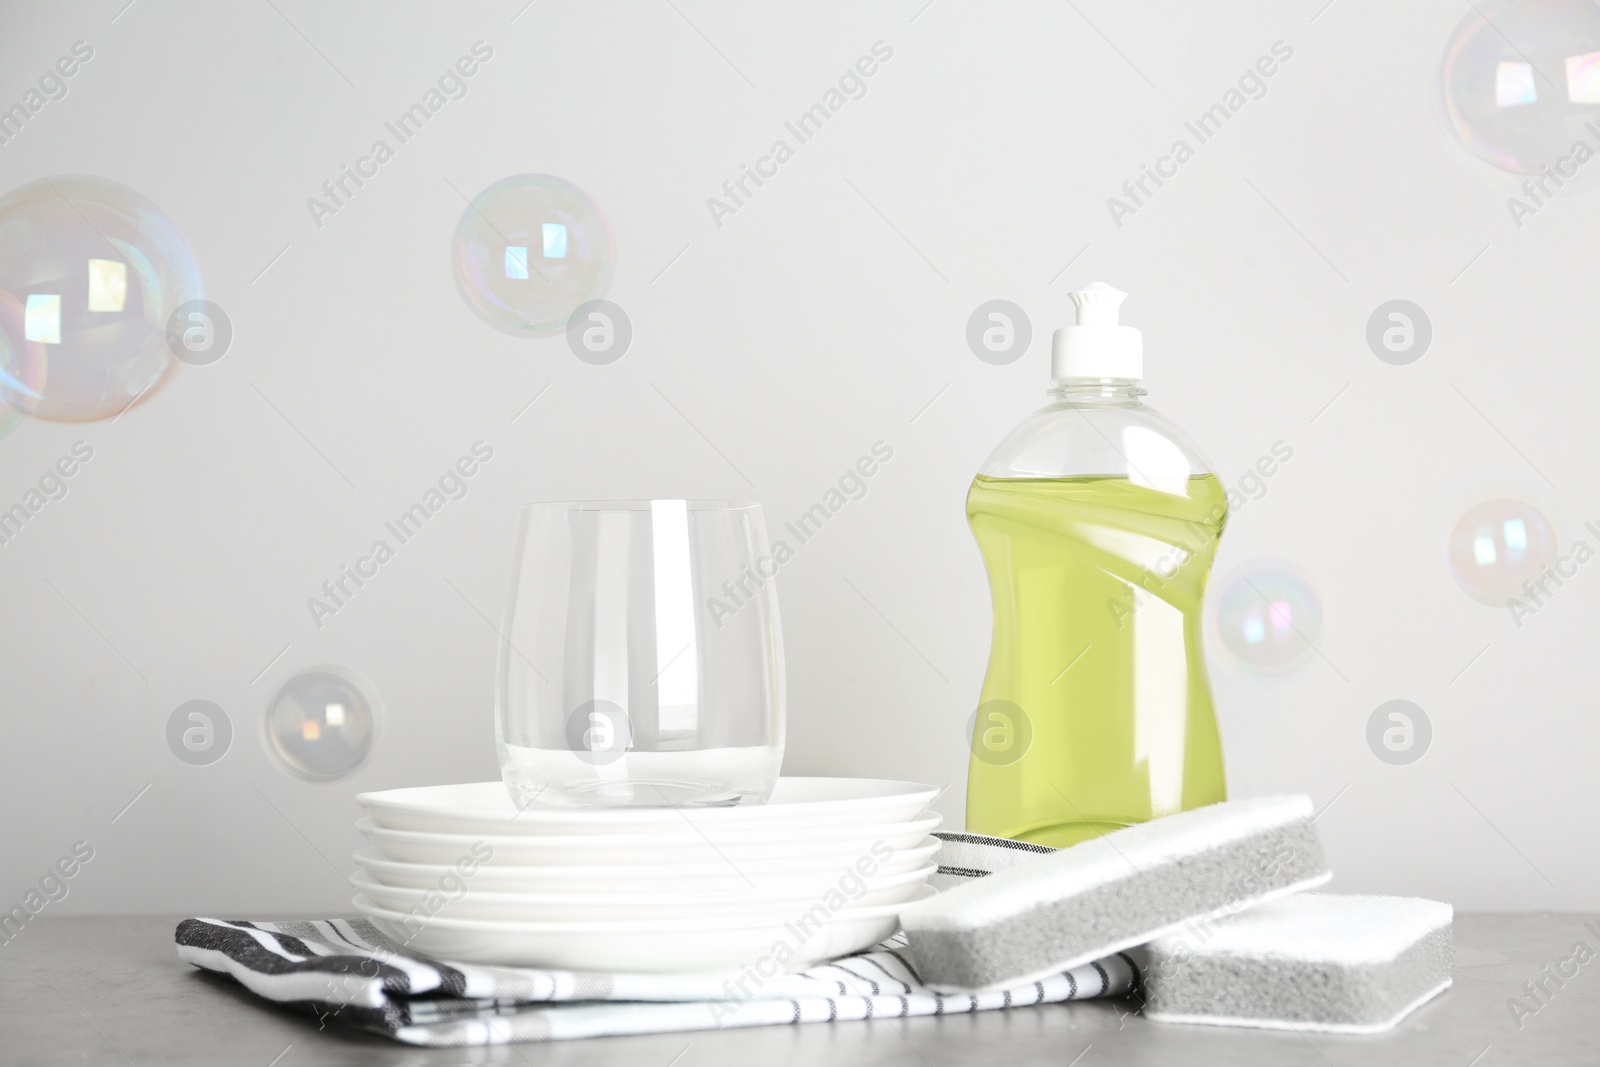 Photo of Cleaning supplies for dish washing, plates and soap bubbles on grey background